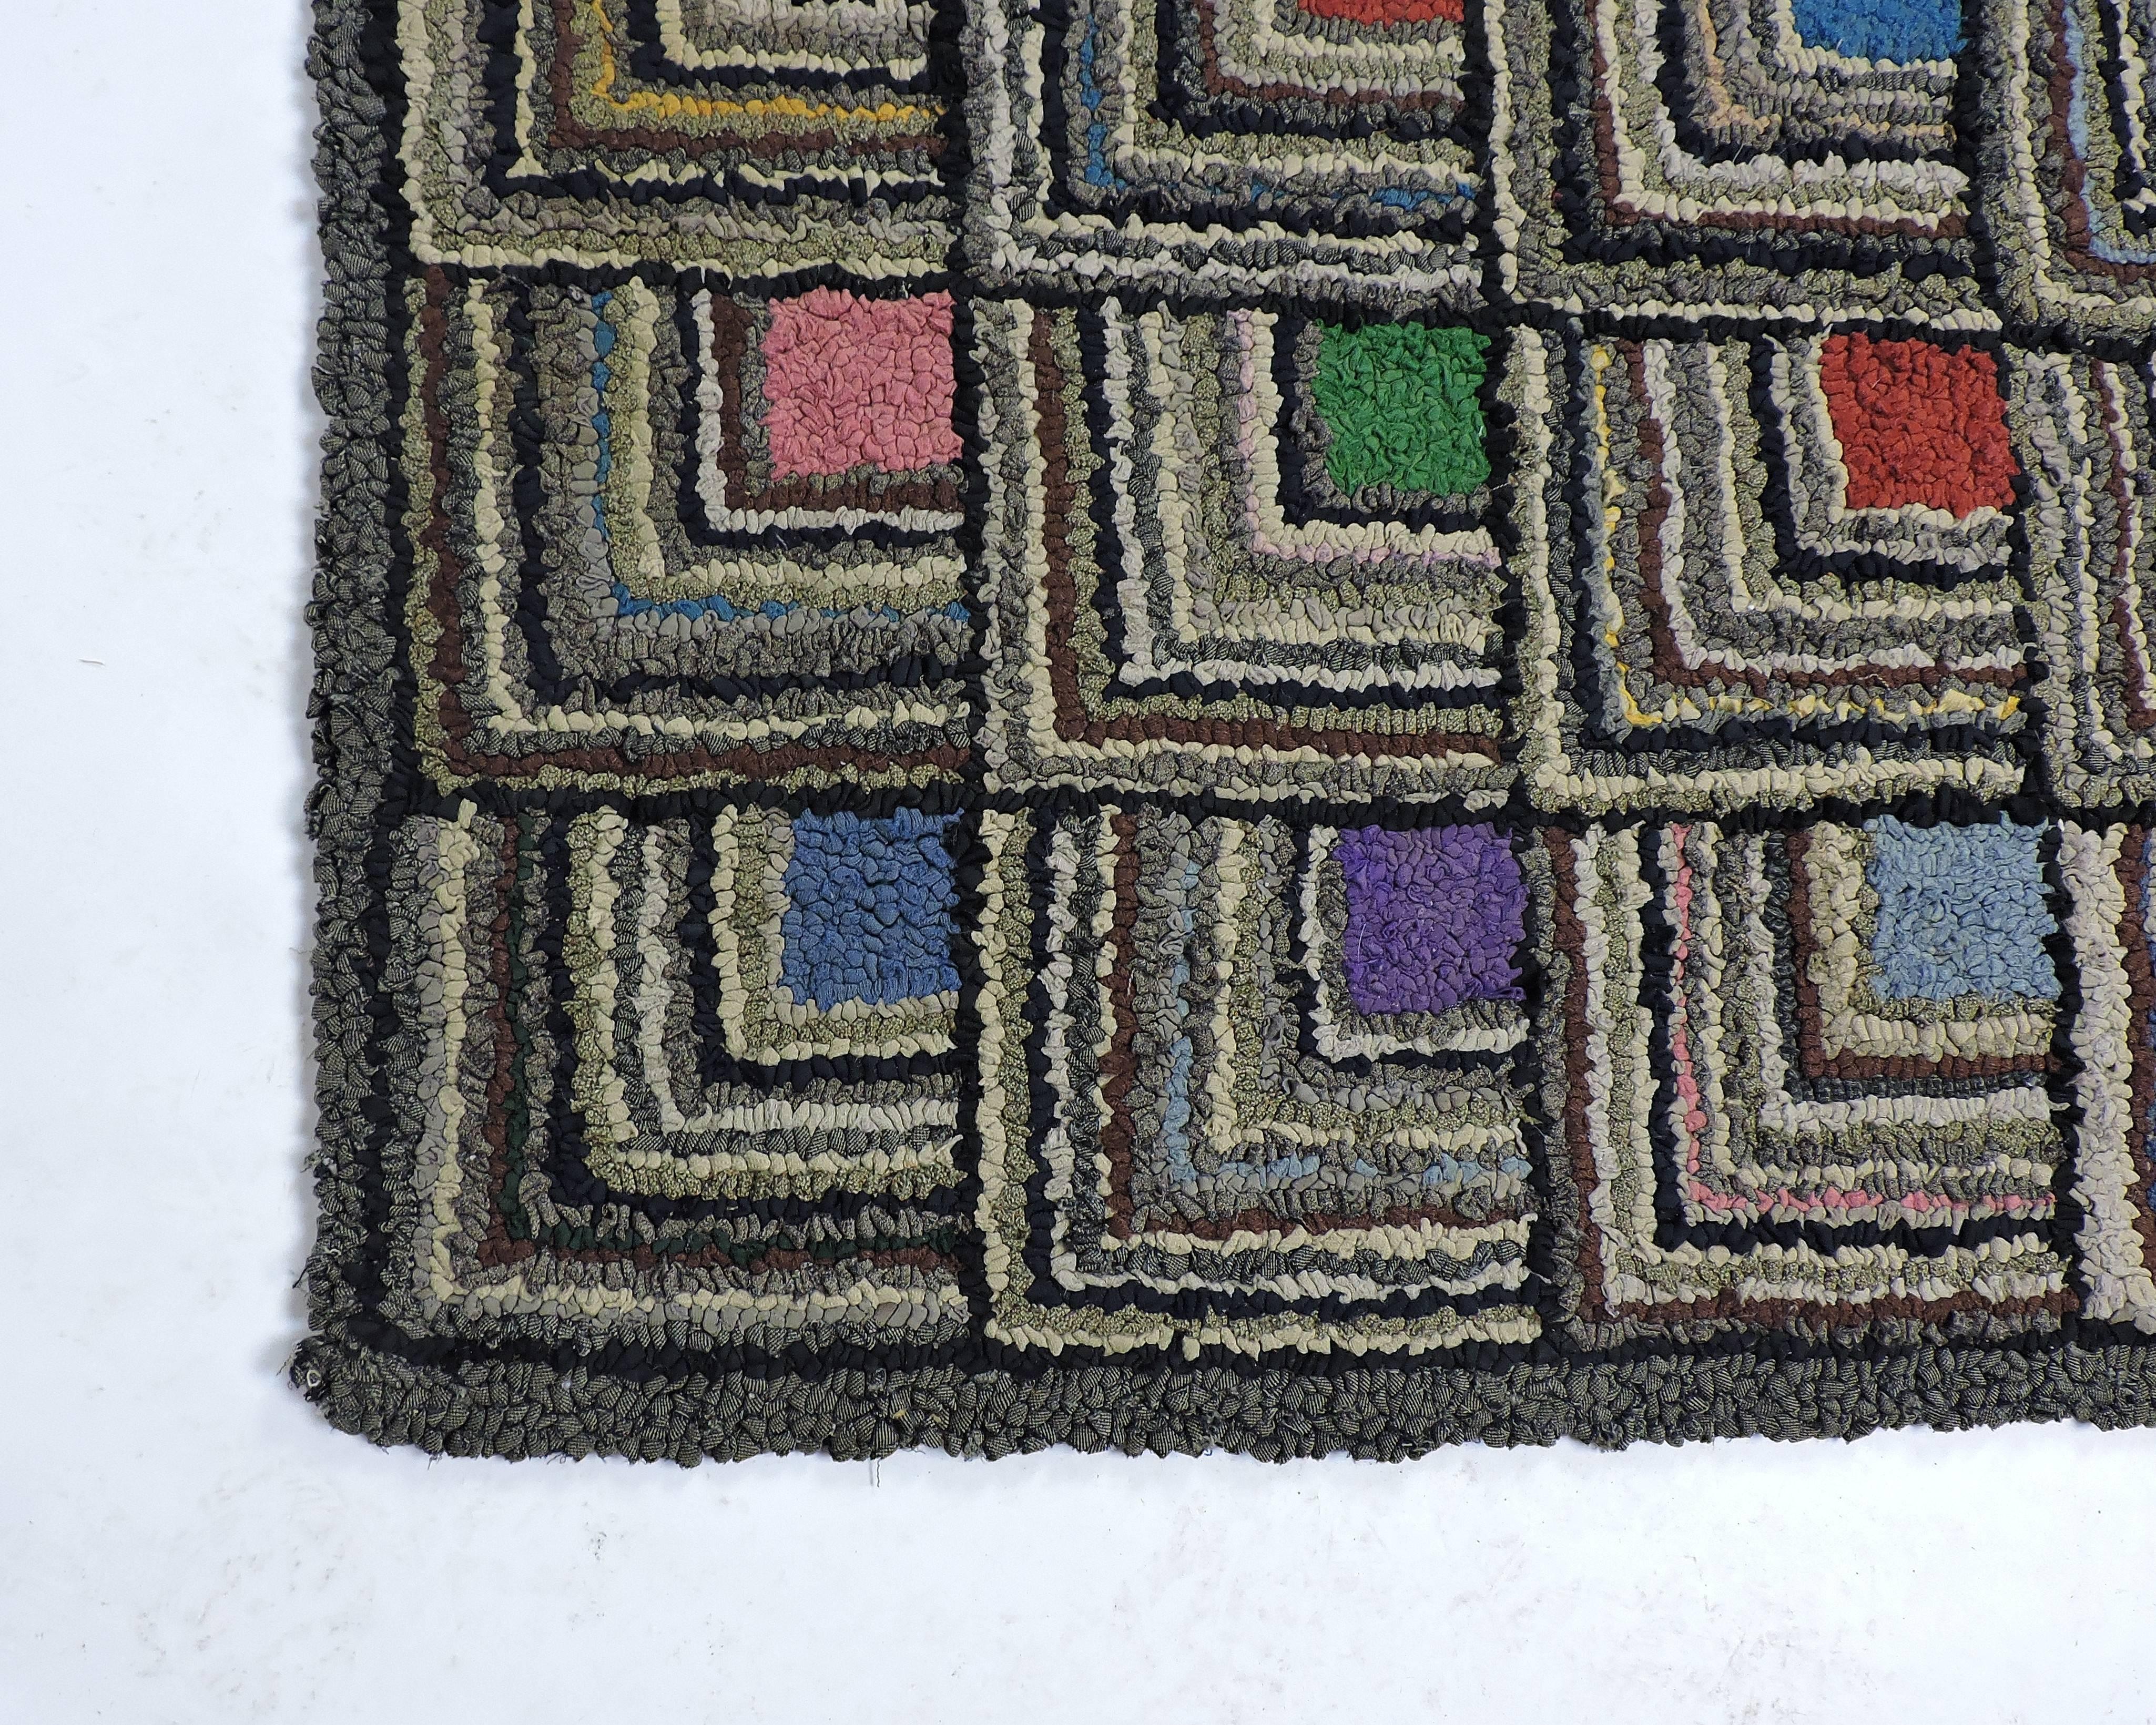 Striking example of a handmade hooked rug in a log cabin quilt pattern. With its modernist geometric pattern, vibrant colors and a three-dimensional look, this rug would fit into a variety of interior styles. Would also make a beautiful wall hanging.